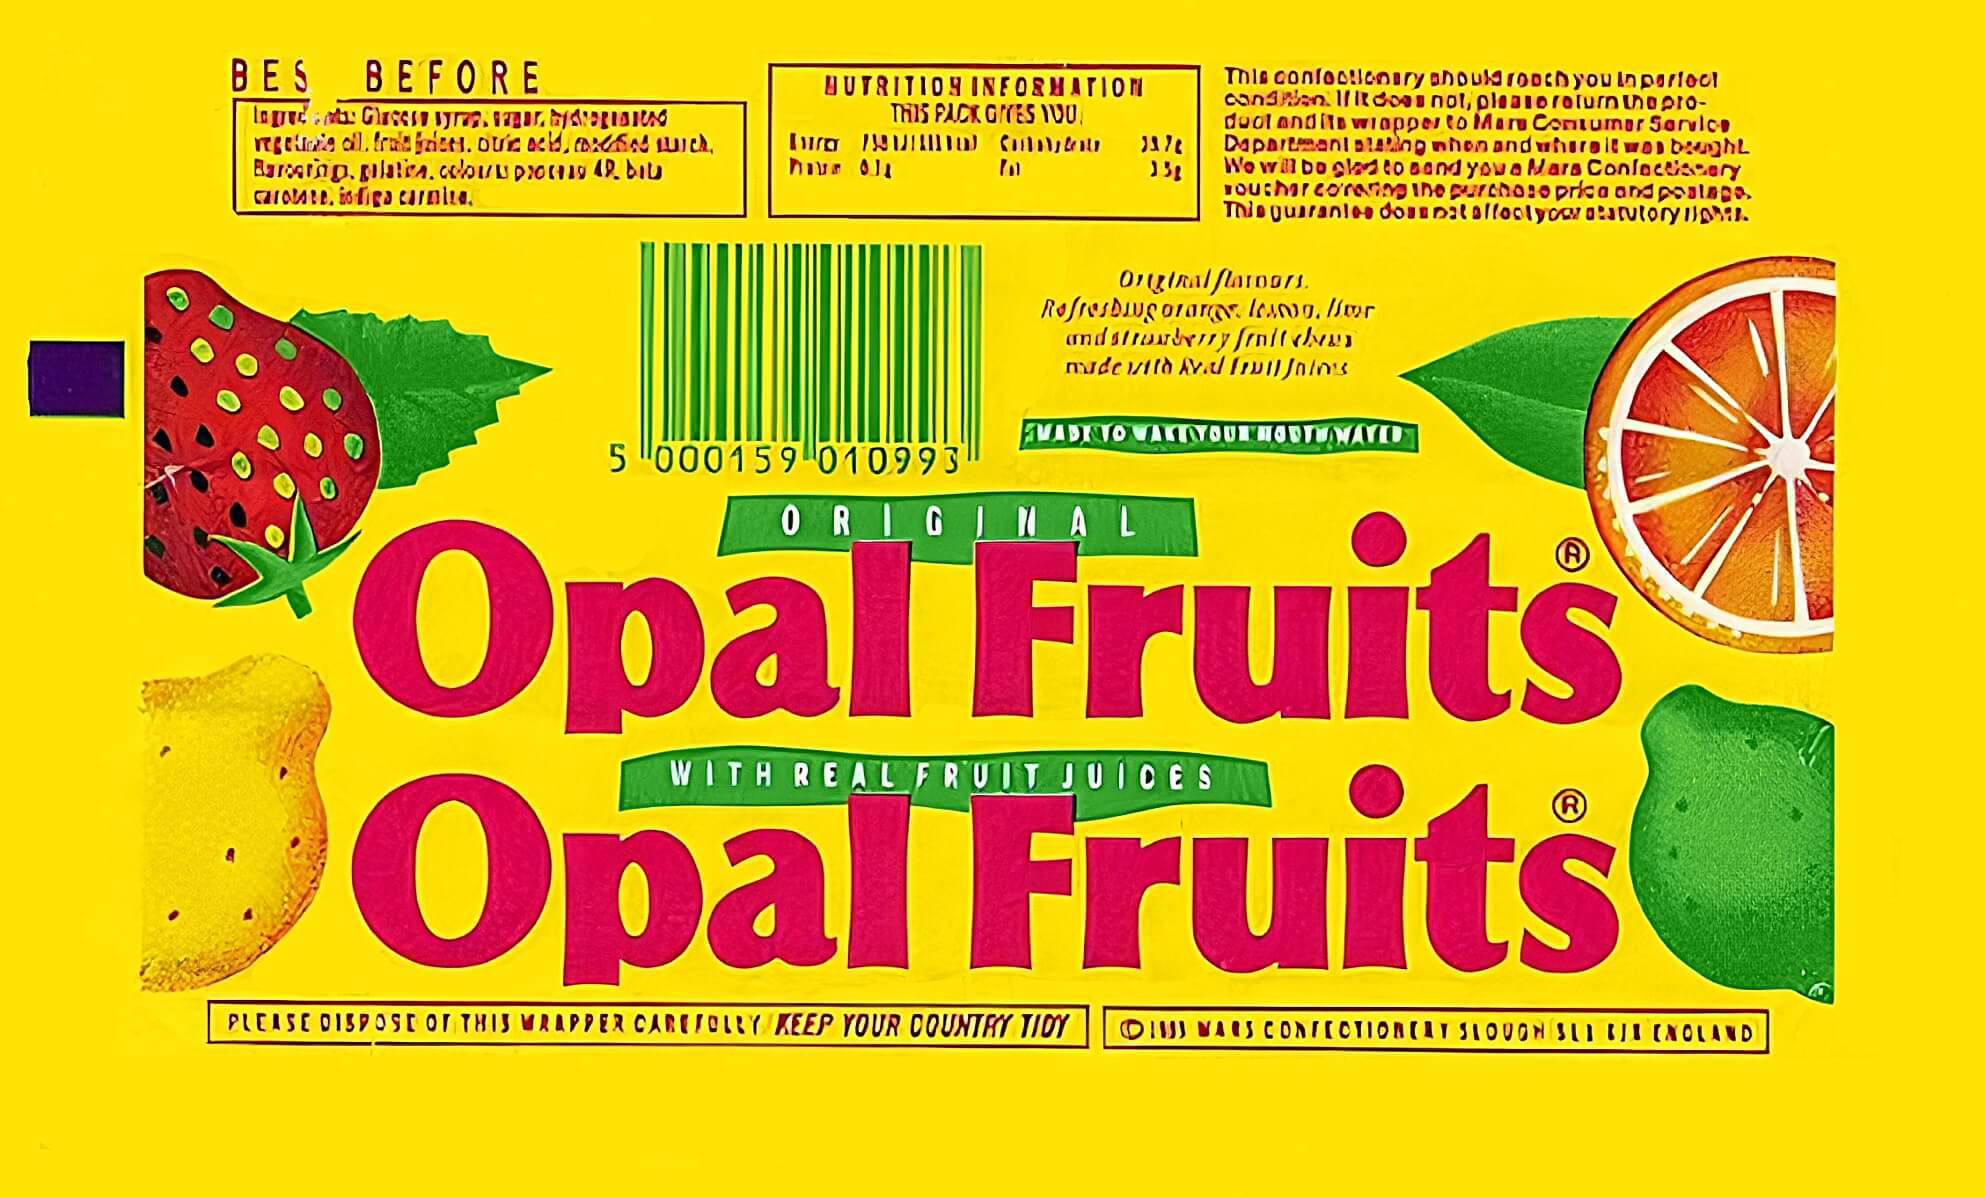 Opal Fruits wrapper from 1990. Yellow with red logo